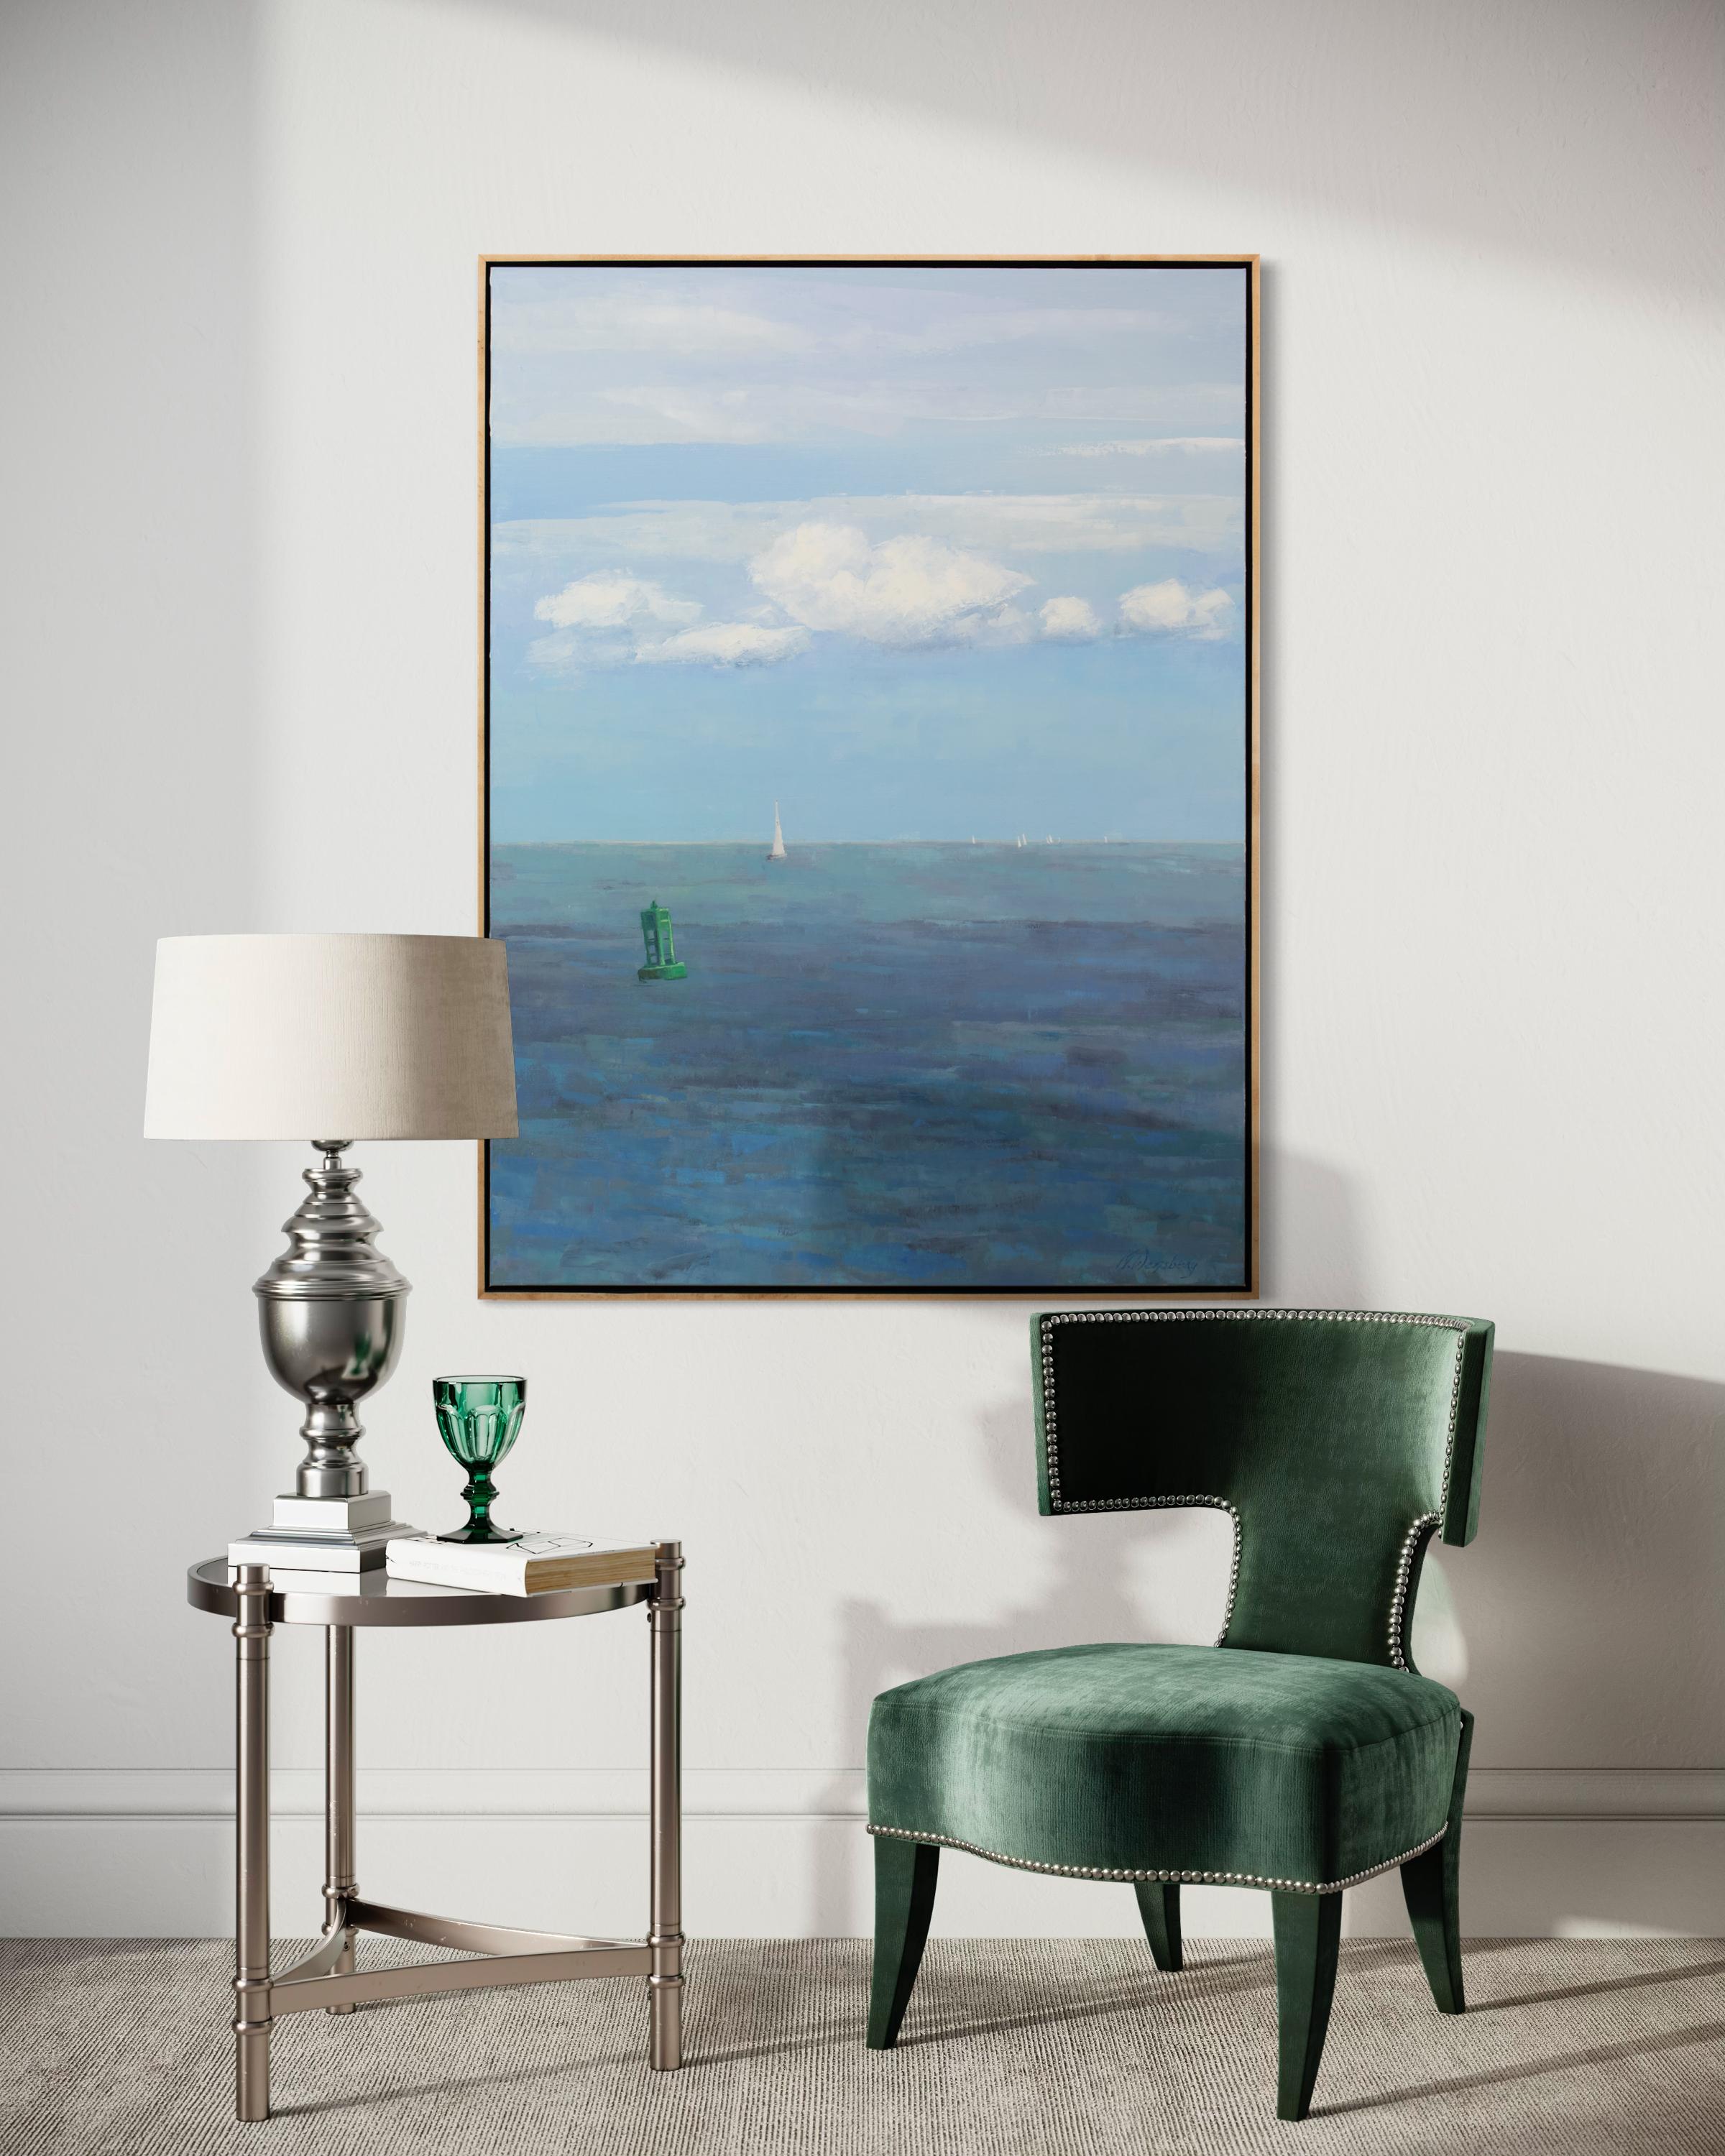 This traditional seascape painting by Molly Doe Wensberg features a cool blue palette, and captures a coastal seascape scene with a small white sailboat sailing in open waters near the horizon line, and a green buey closer to the foreground. Very